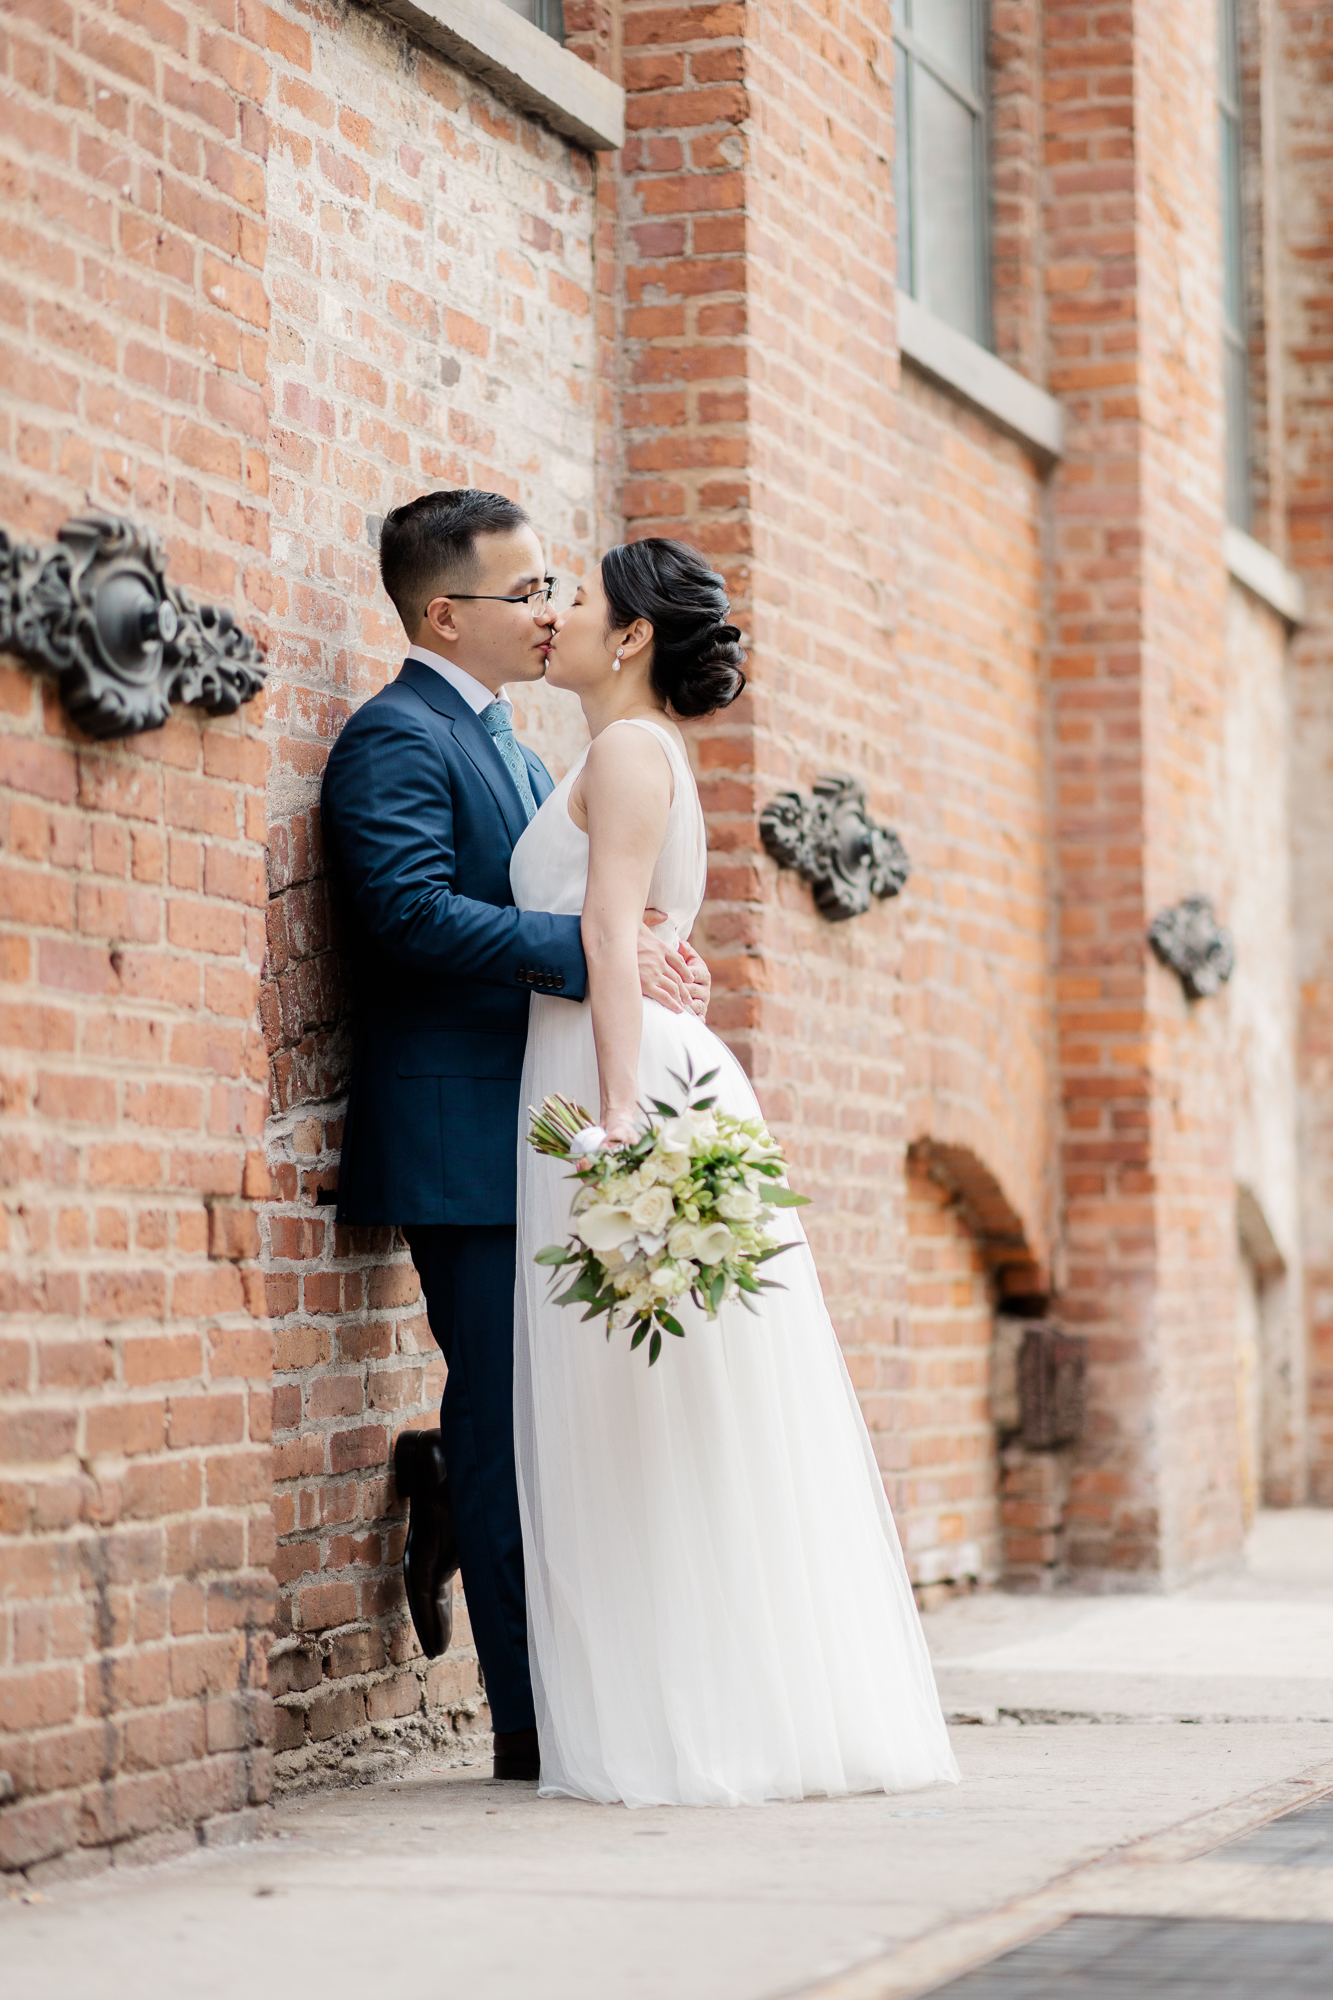 Stunning Elopement Photography in New York\'s DUMBO and Central Park